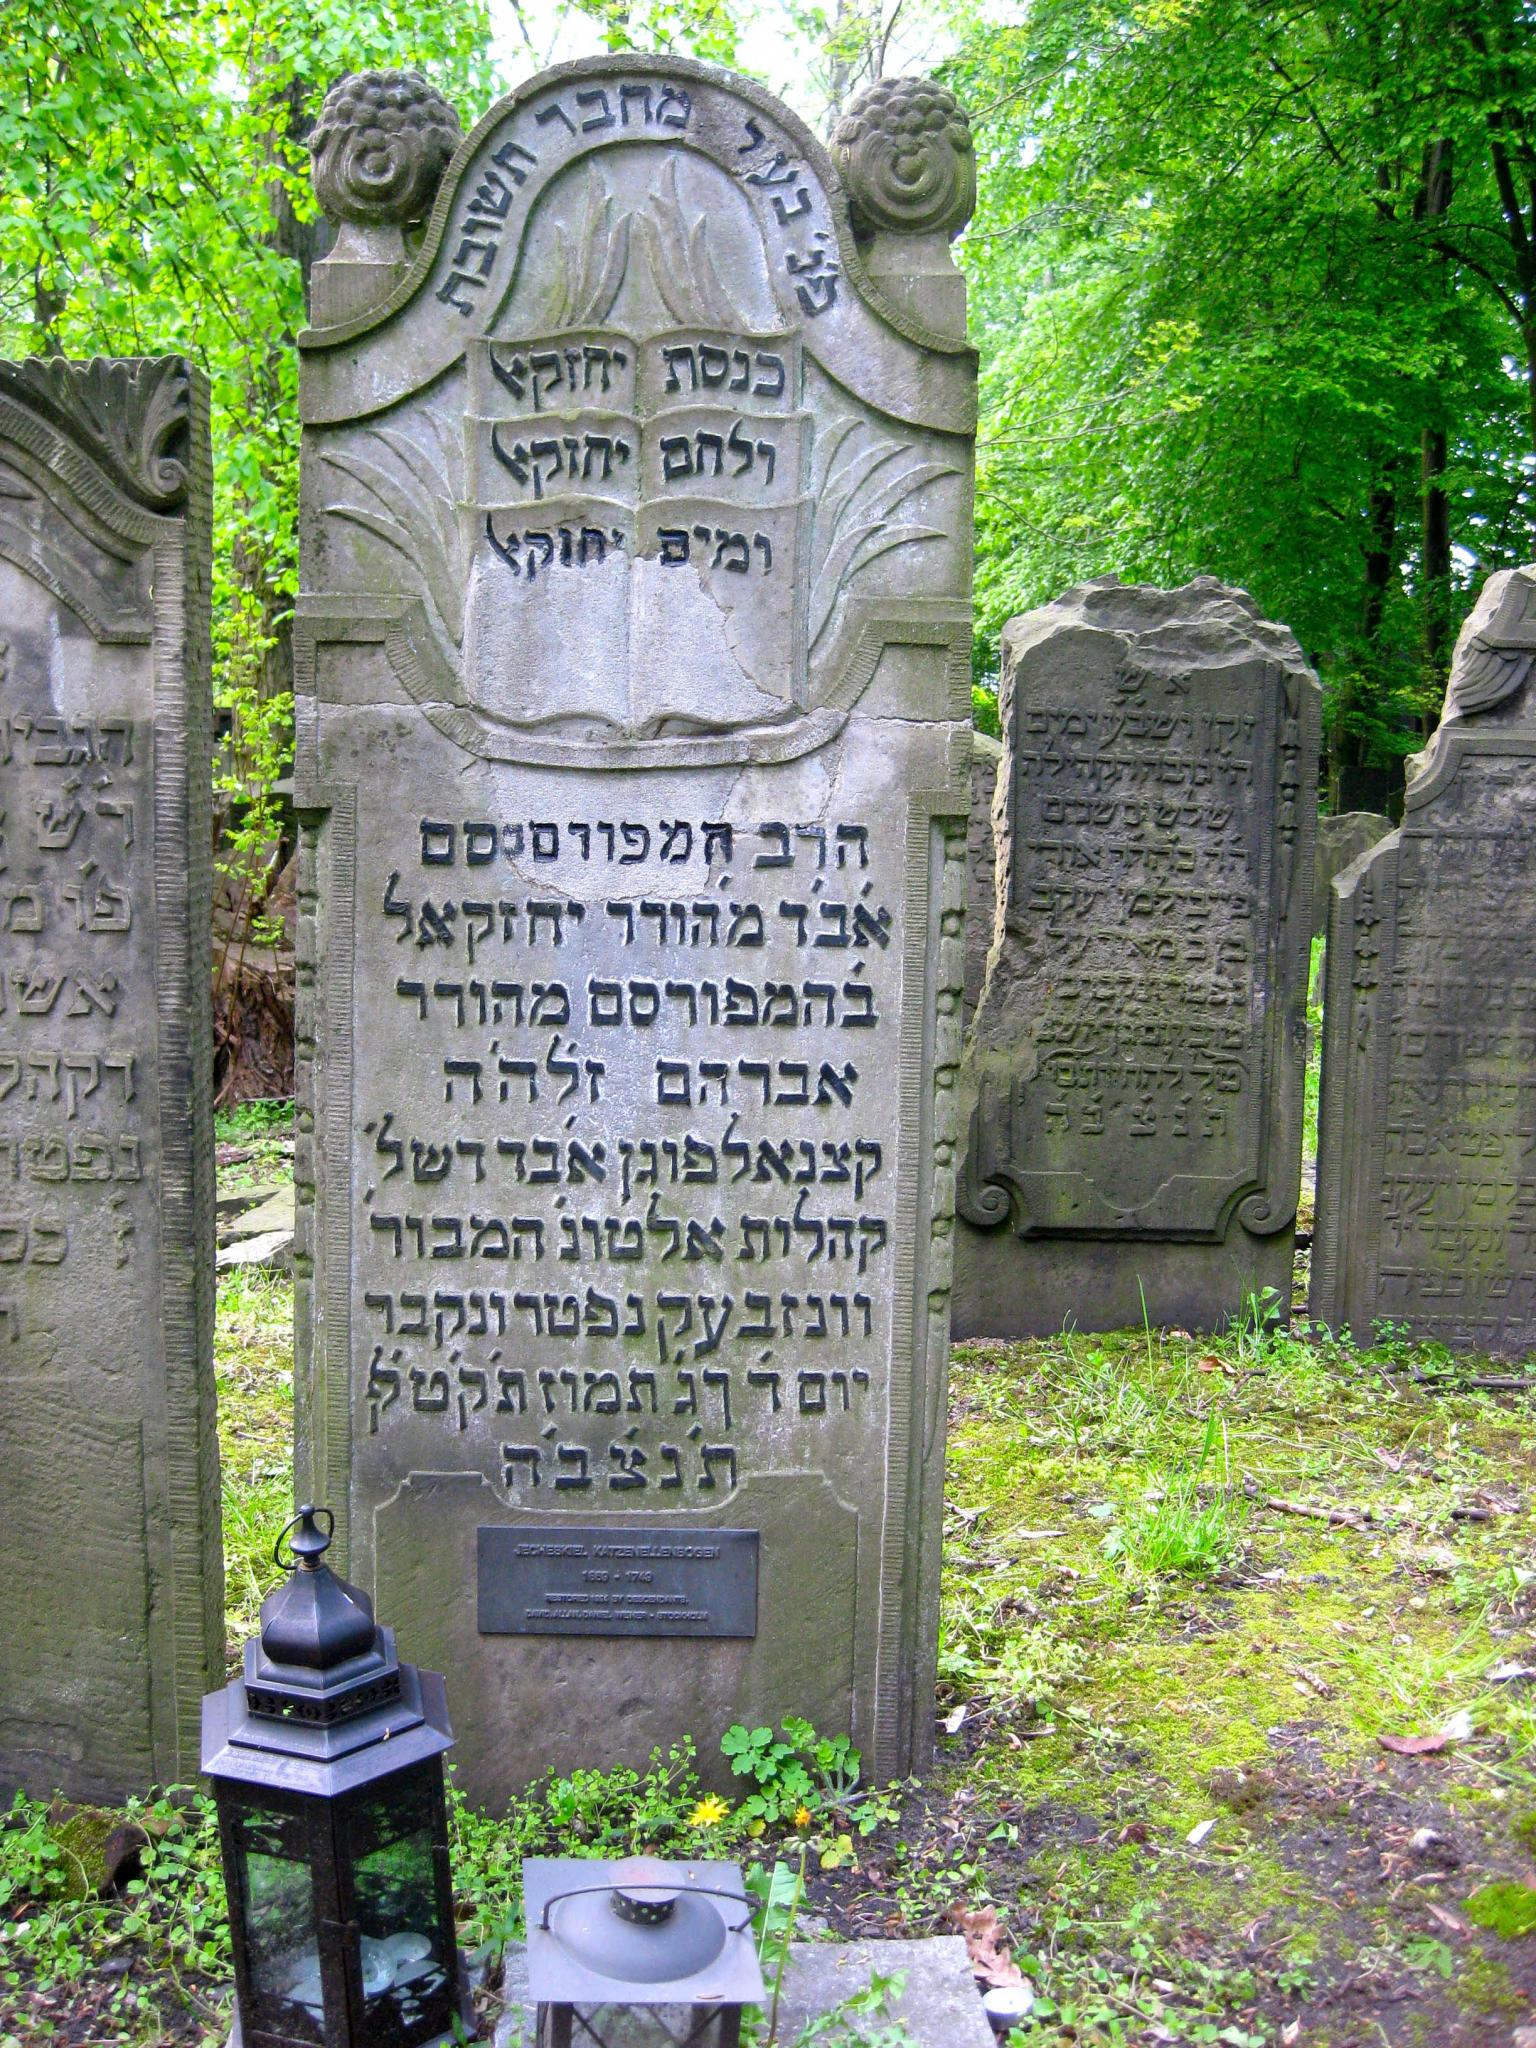 Tombstone of relief of open books, Hebrew inscriptions, and two lanterns on ground in front. 